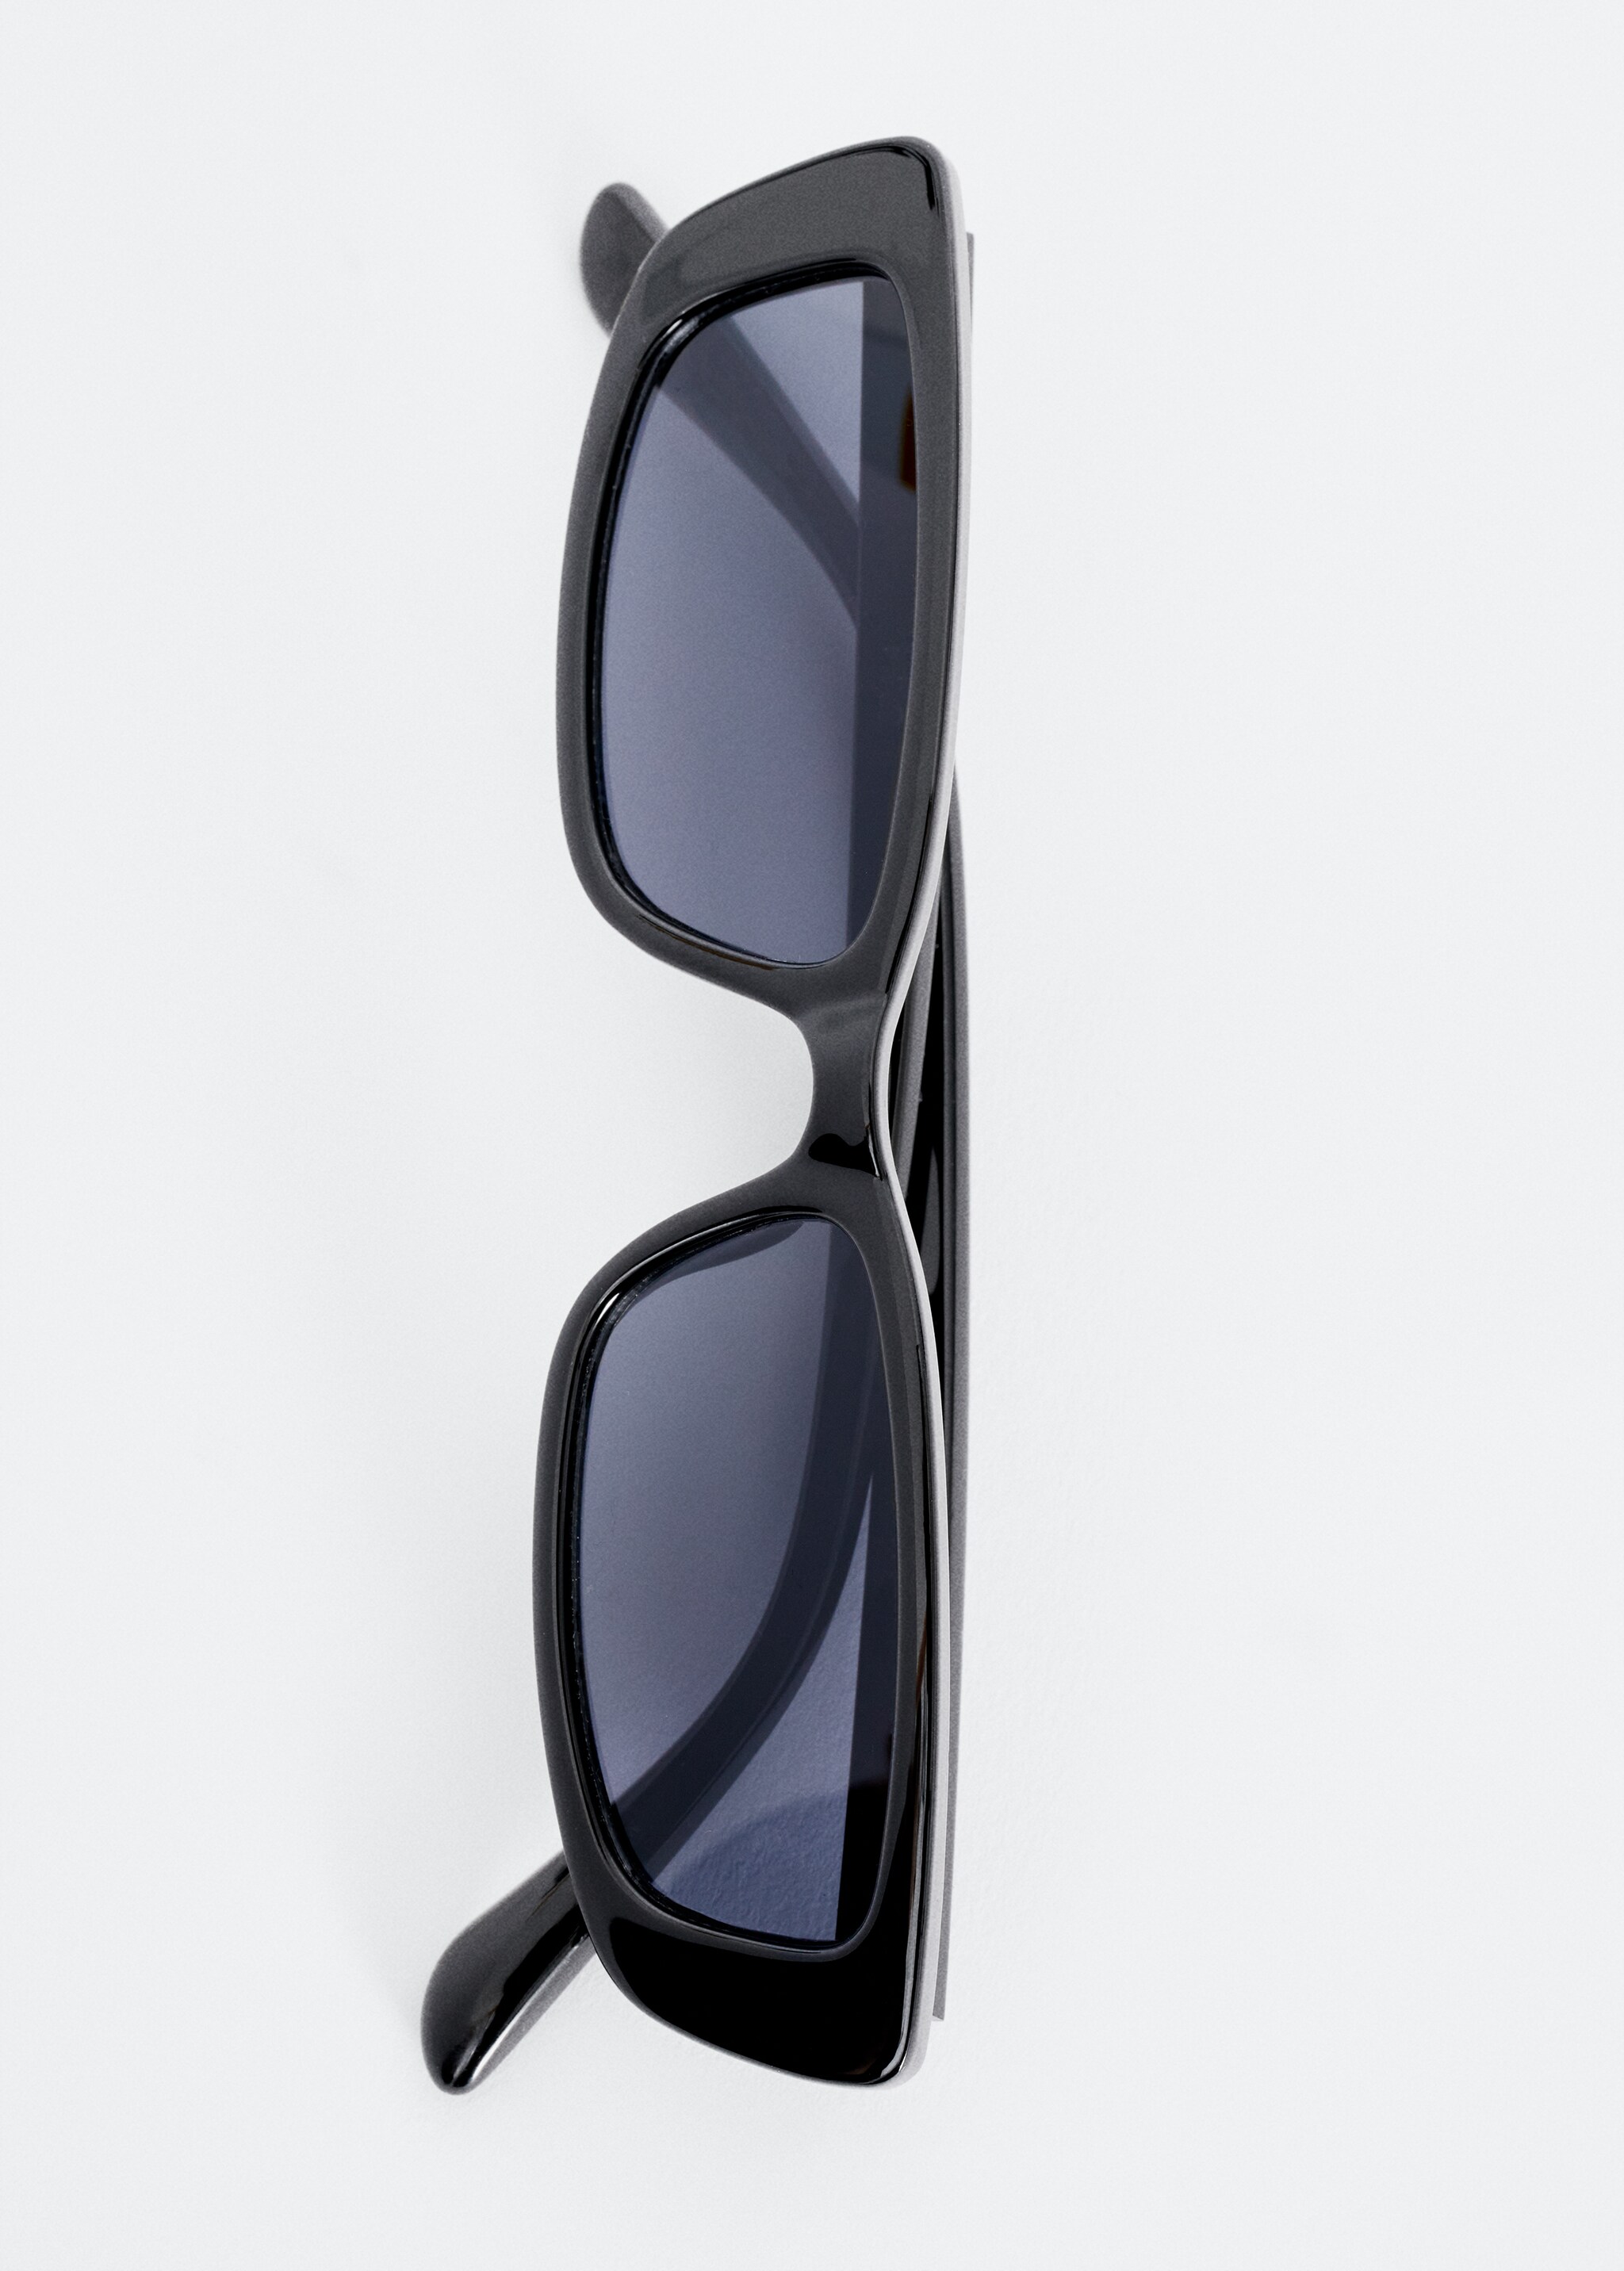 Retro style sunglasses - Details of the article 2